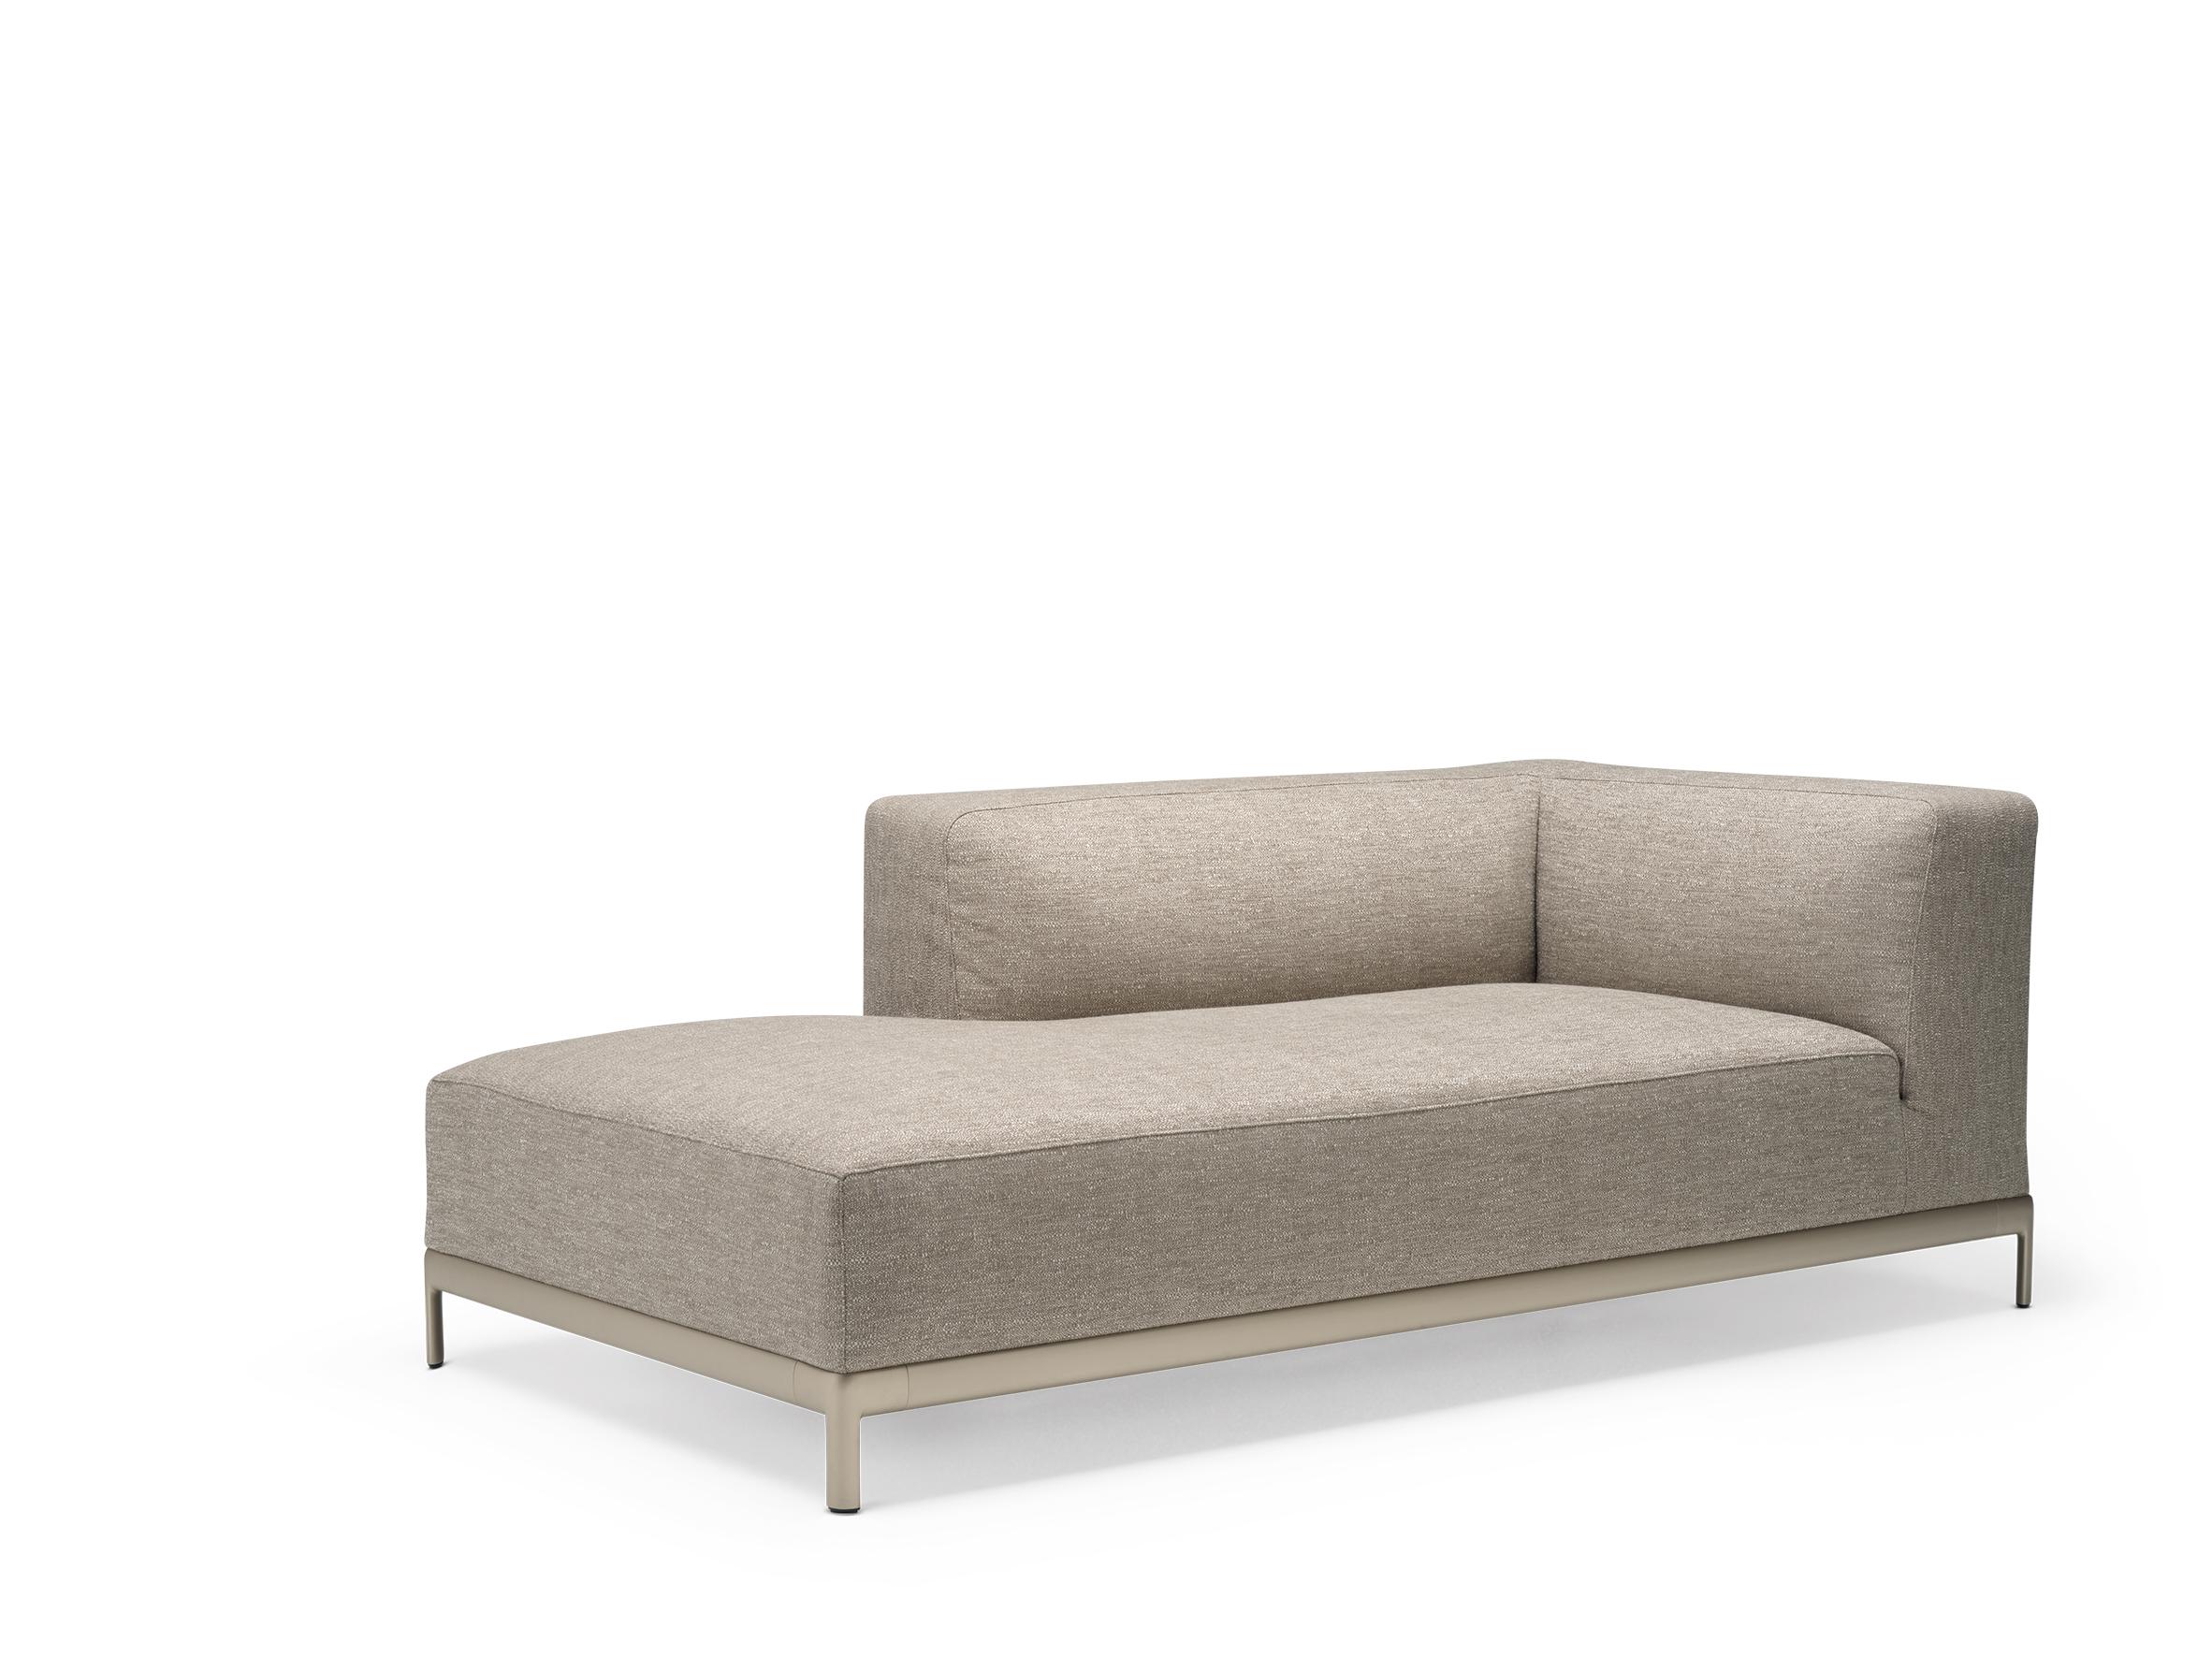 Alias P38 AluZen Soft Angular Sofa in Brown Upholstery & Anodized Gold Frame by Ludovica+Roberto Palomba

Modular corner element with structure in lacquered or polished aluminium.Seat, back and armrest with removable cover in fabric or